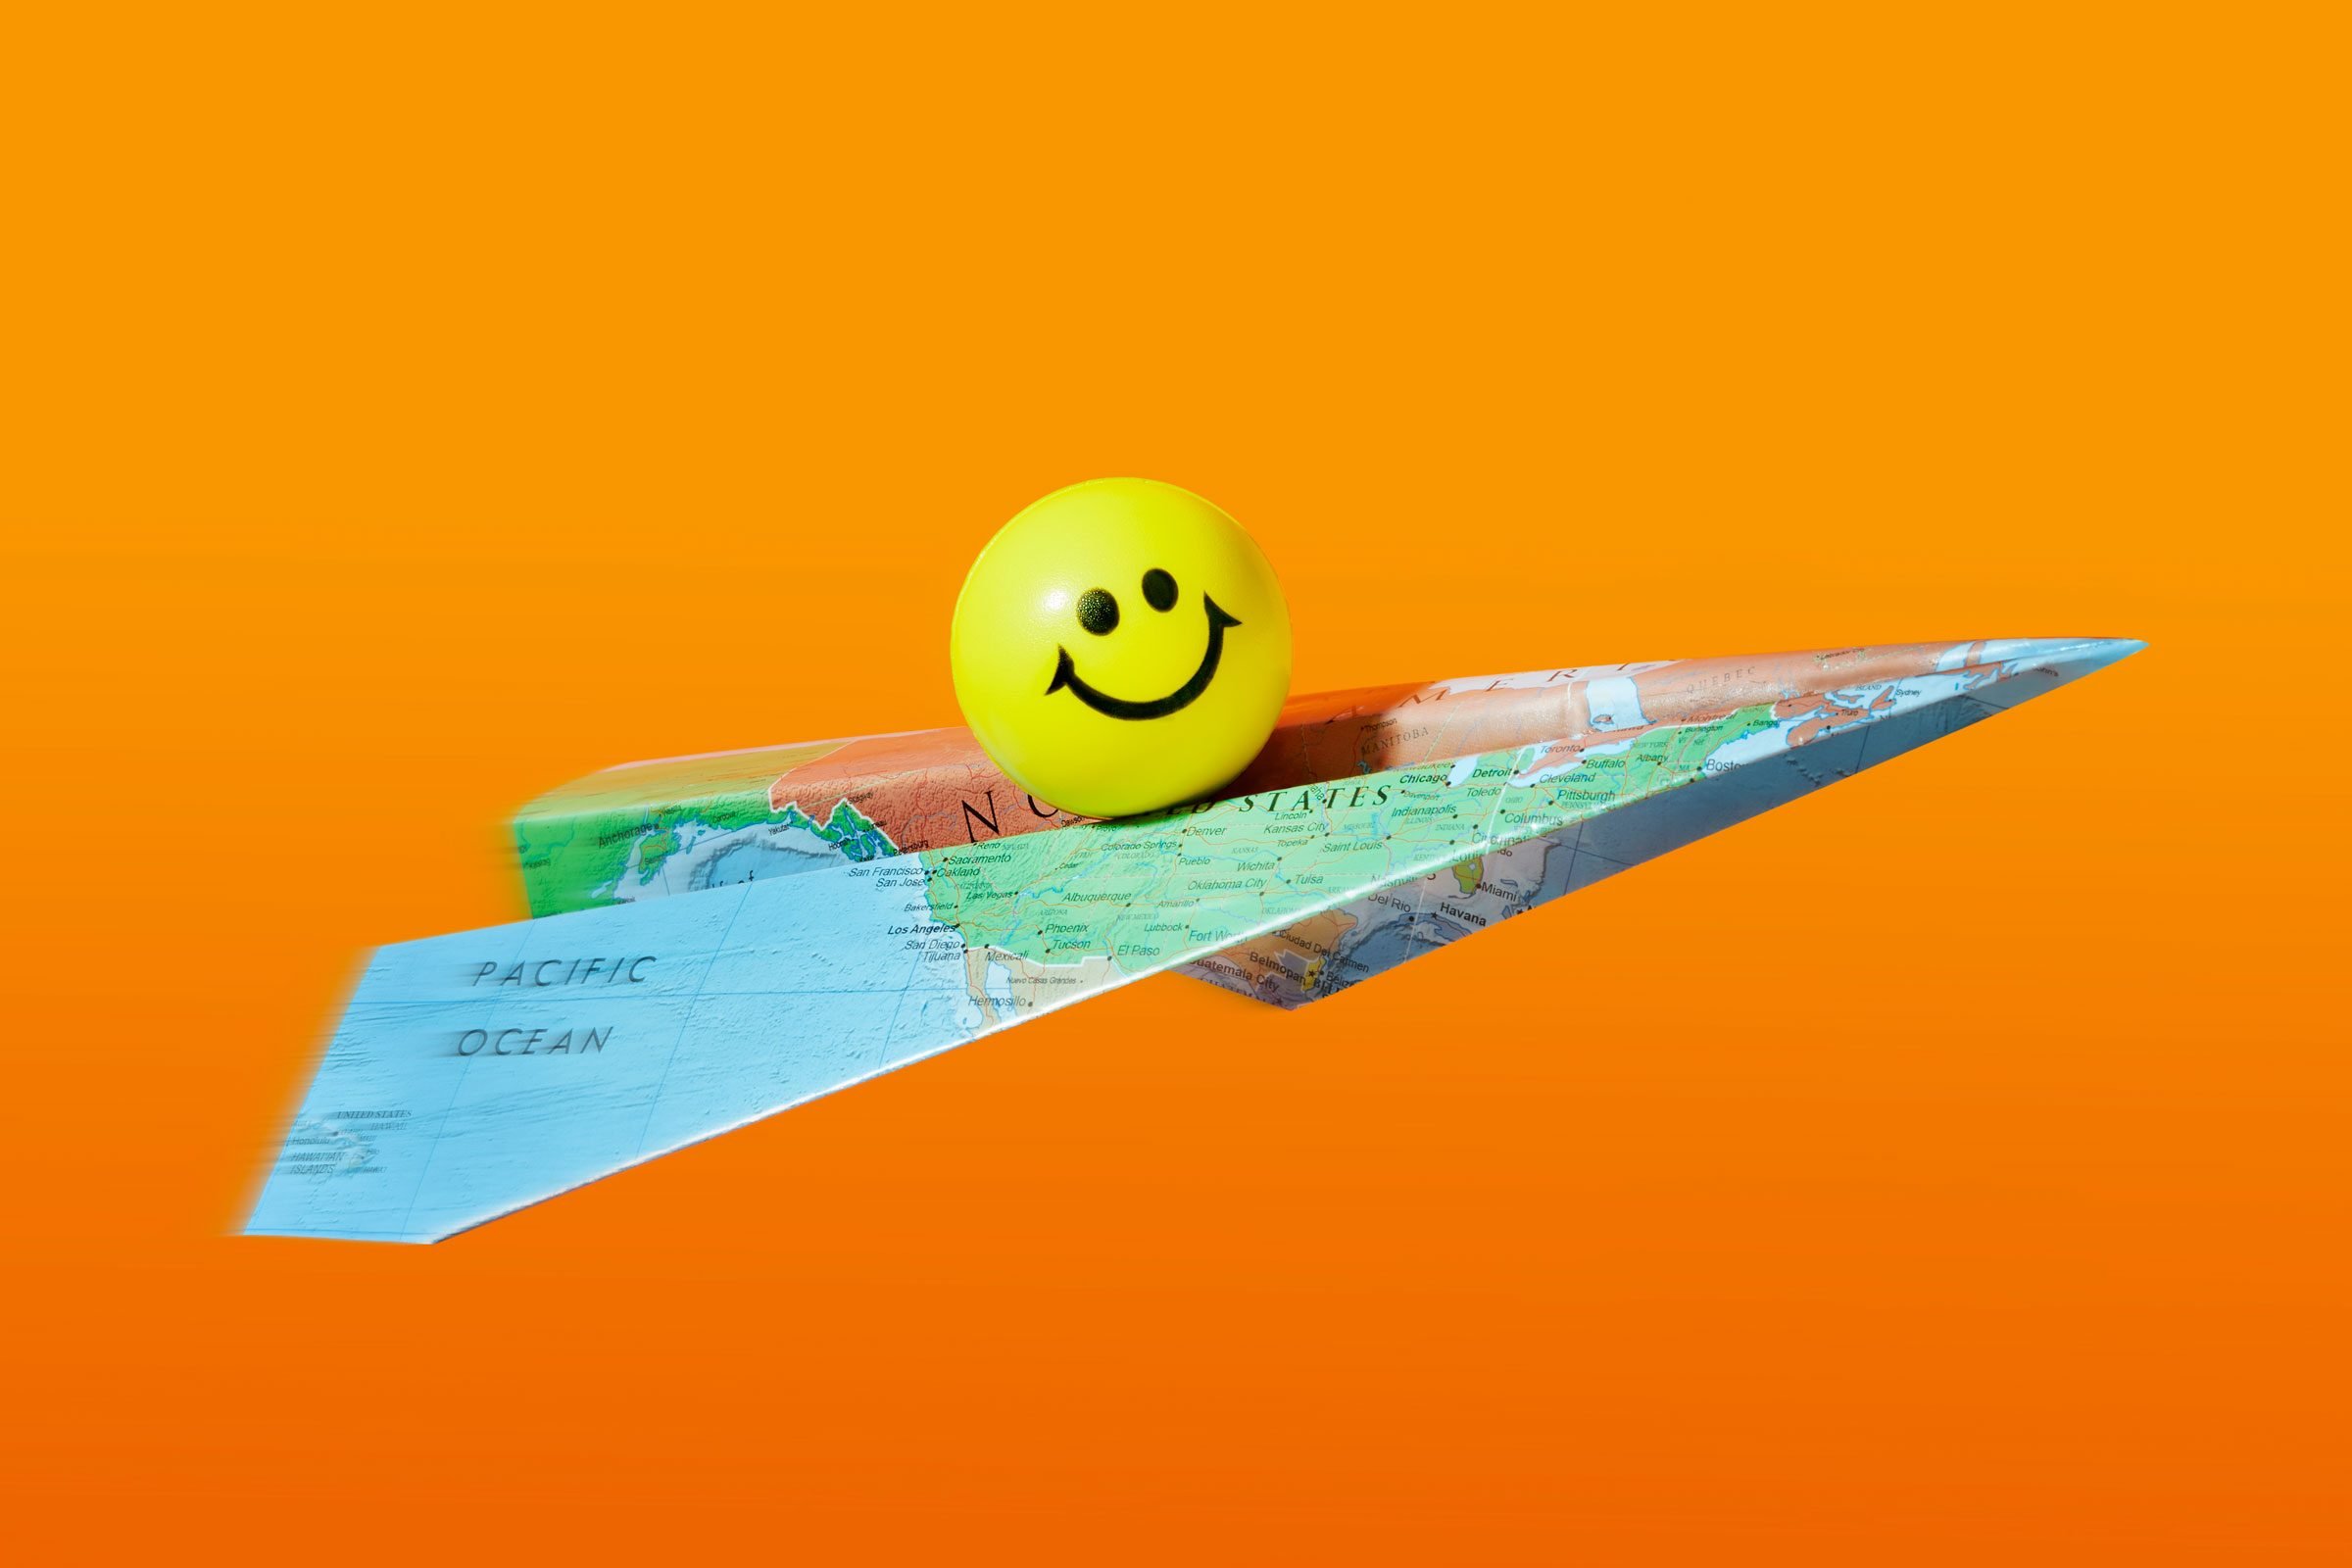 https://www.rd.com/wp-content/uploads/2023/01/smiley-on-a-paper-airplane-map-RDD22_Happy-Purpose_KS_12_14_Plane-MLedit.jpg?fit=700,467